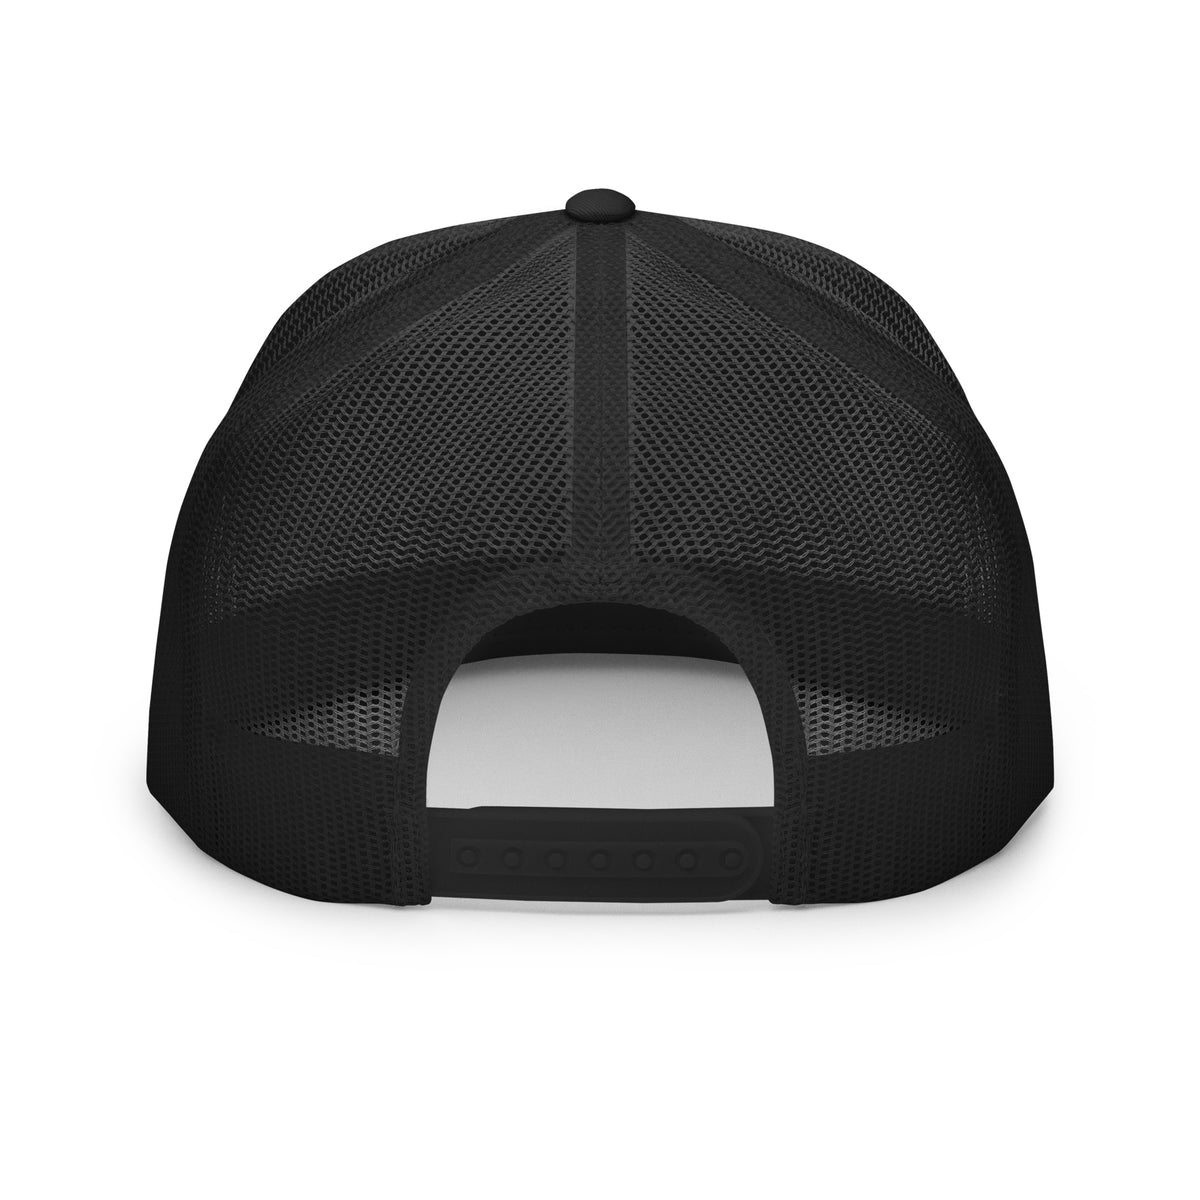 Privateer Factory Racing Division - Snapback Trucker